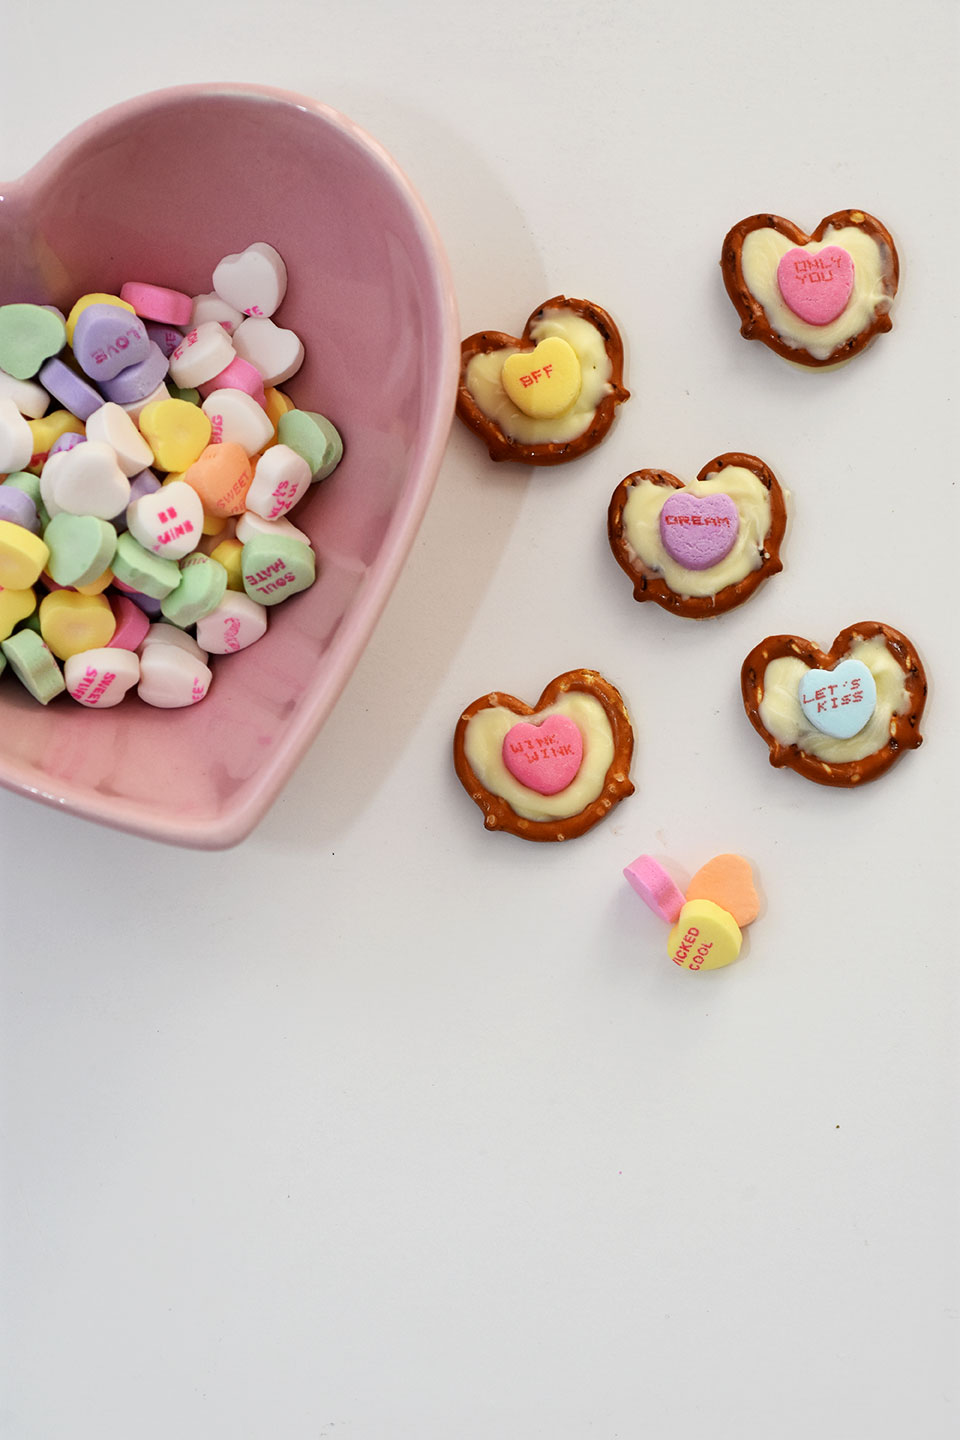 Recipe for Heart Chocolate Pretzels by Happy Family Blog